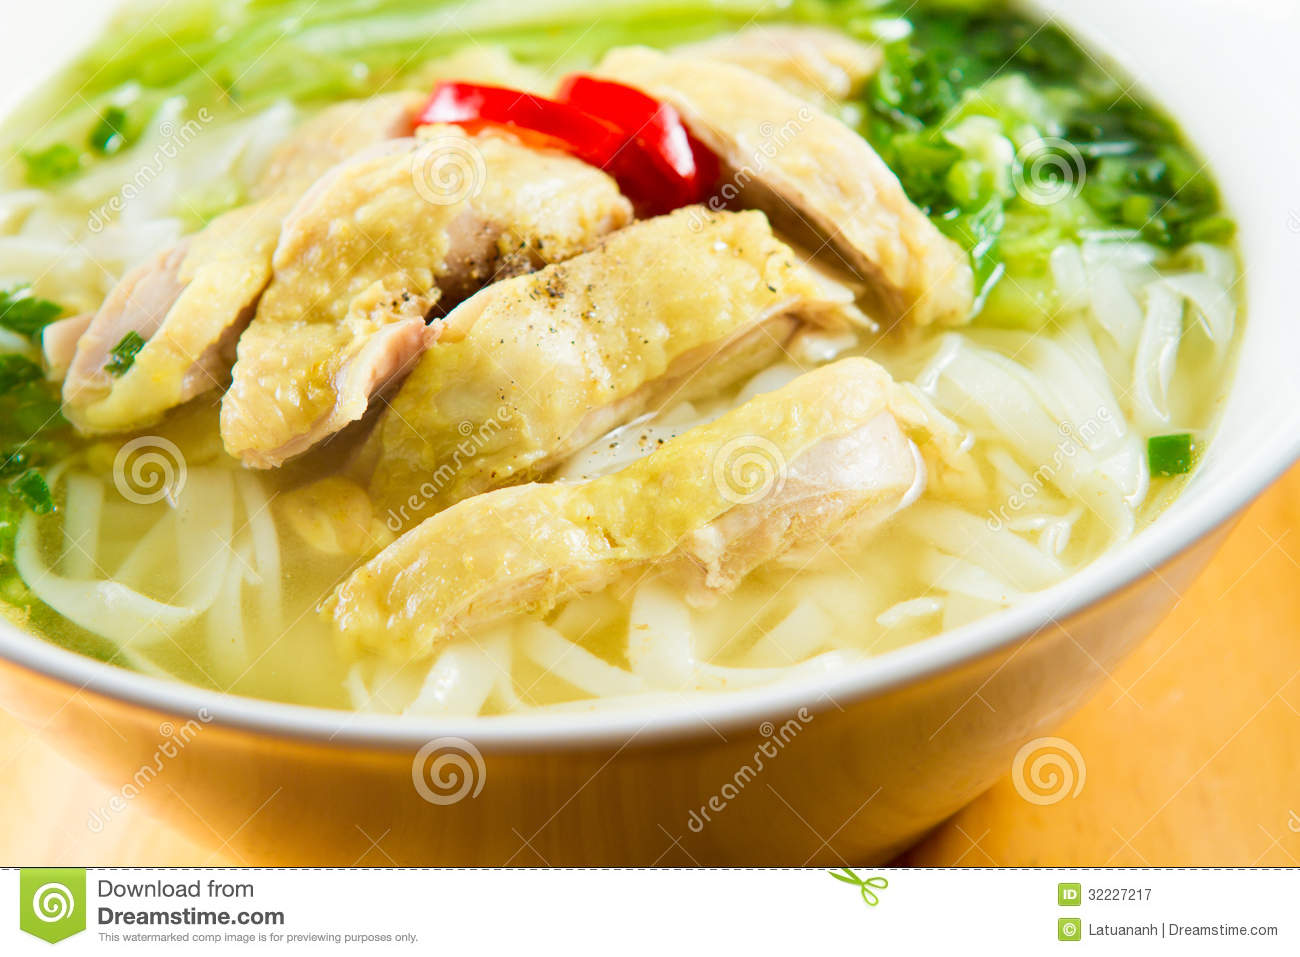 Pho Ga Chicken Noodle Soup Royalty Free Stock Photography   Image